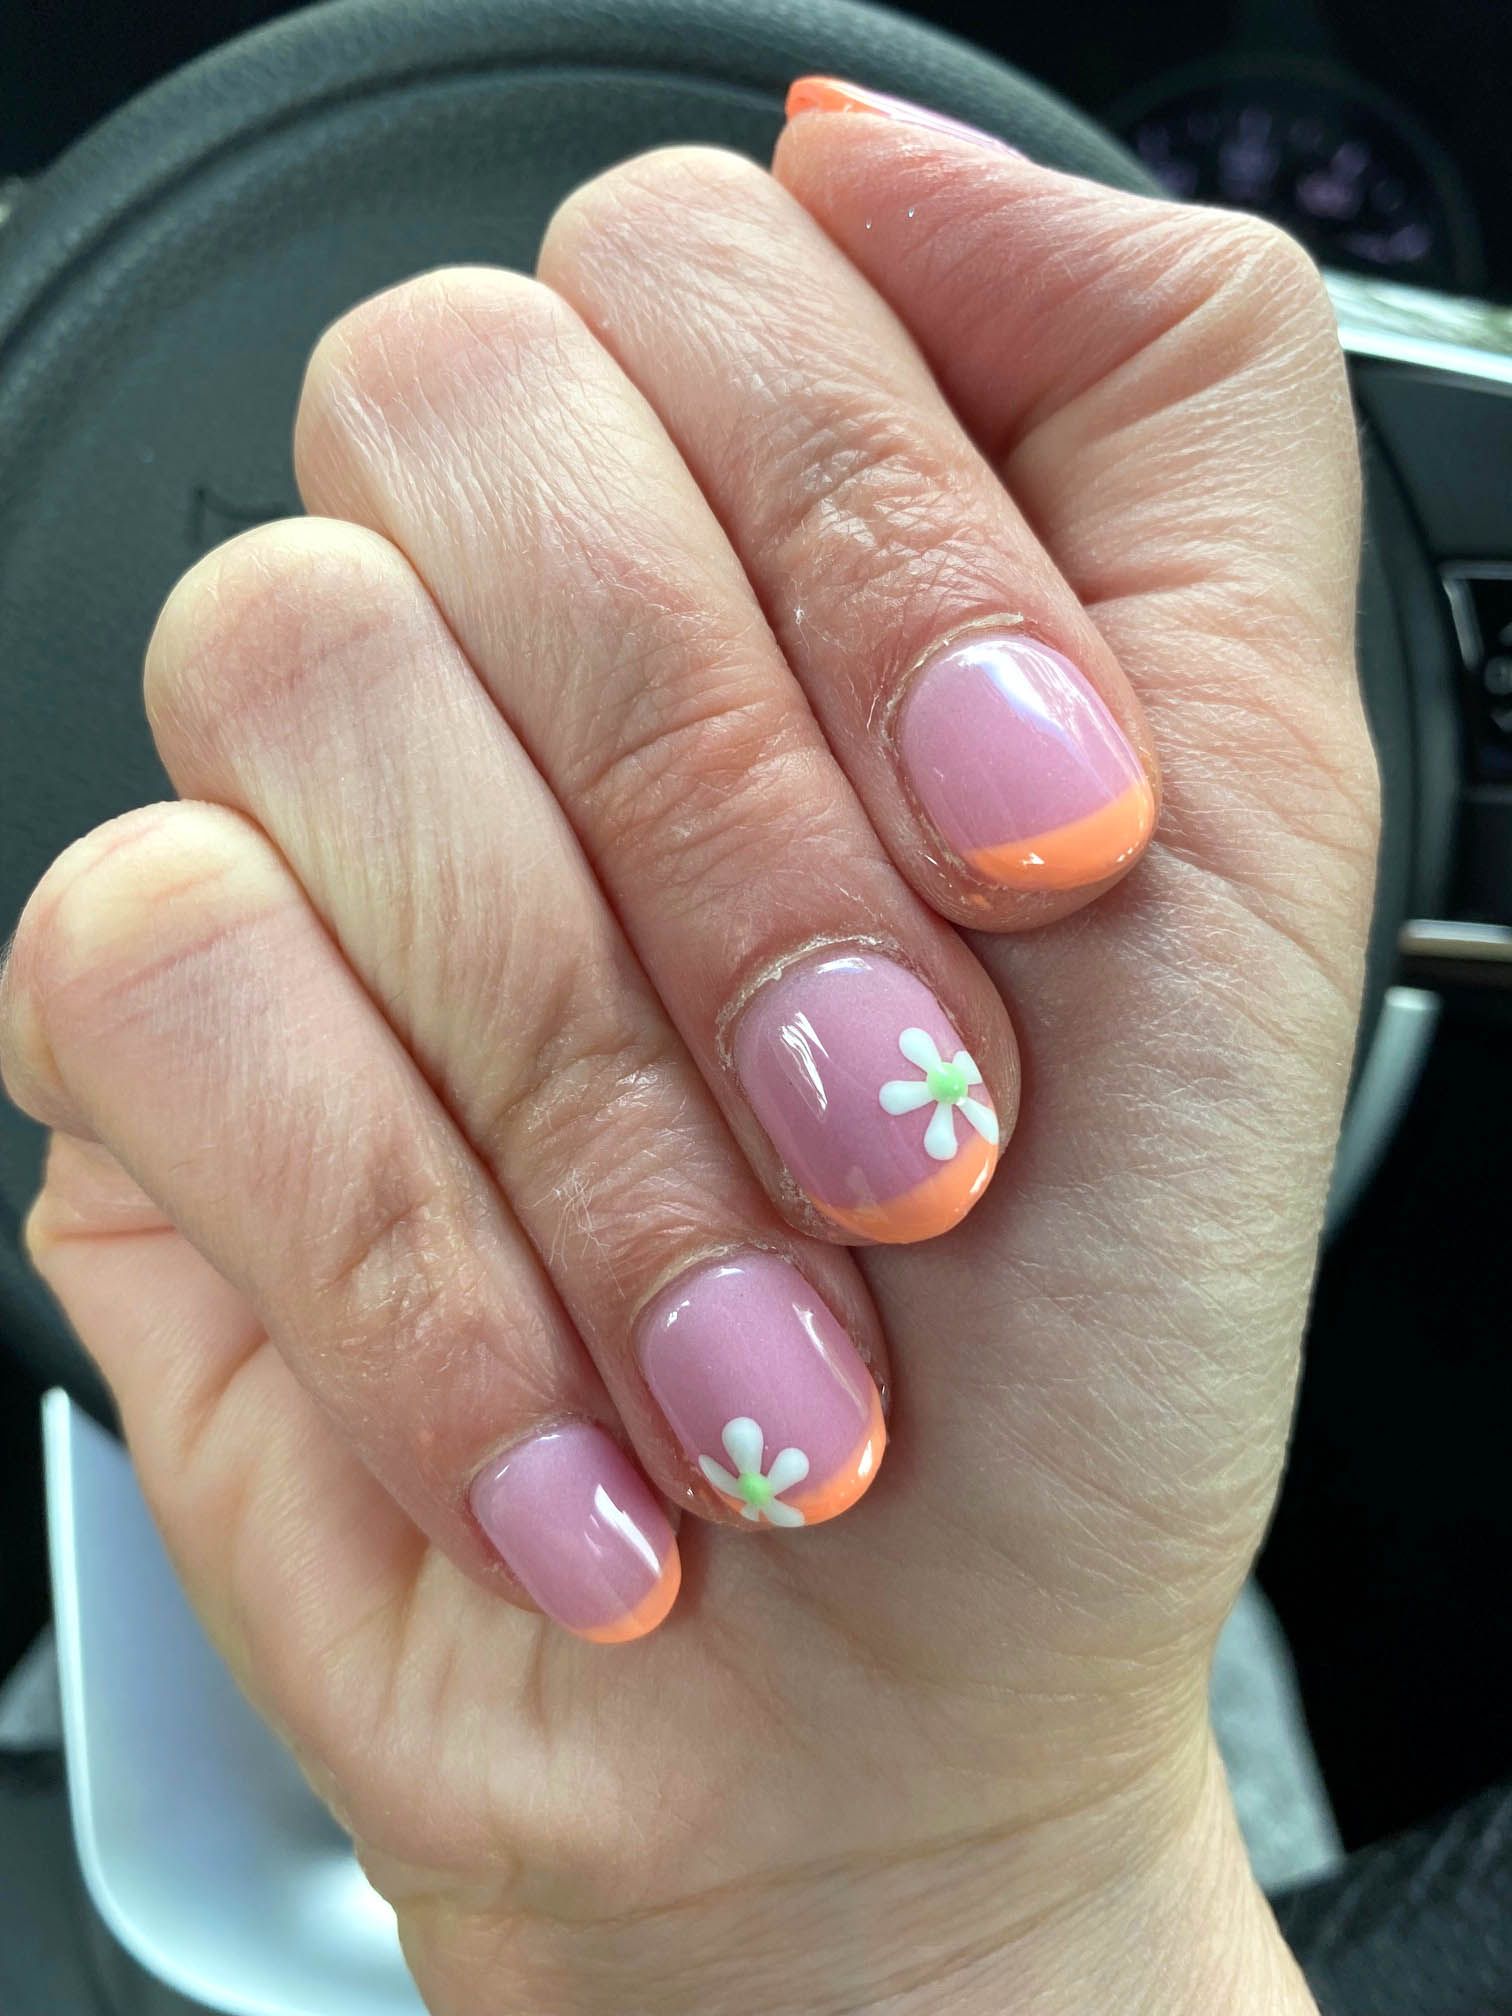 Orange French Tips Nails Manicure With Flowers Nail Design Ideas